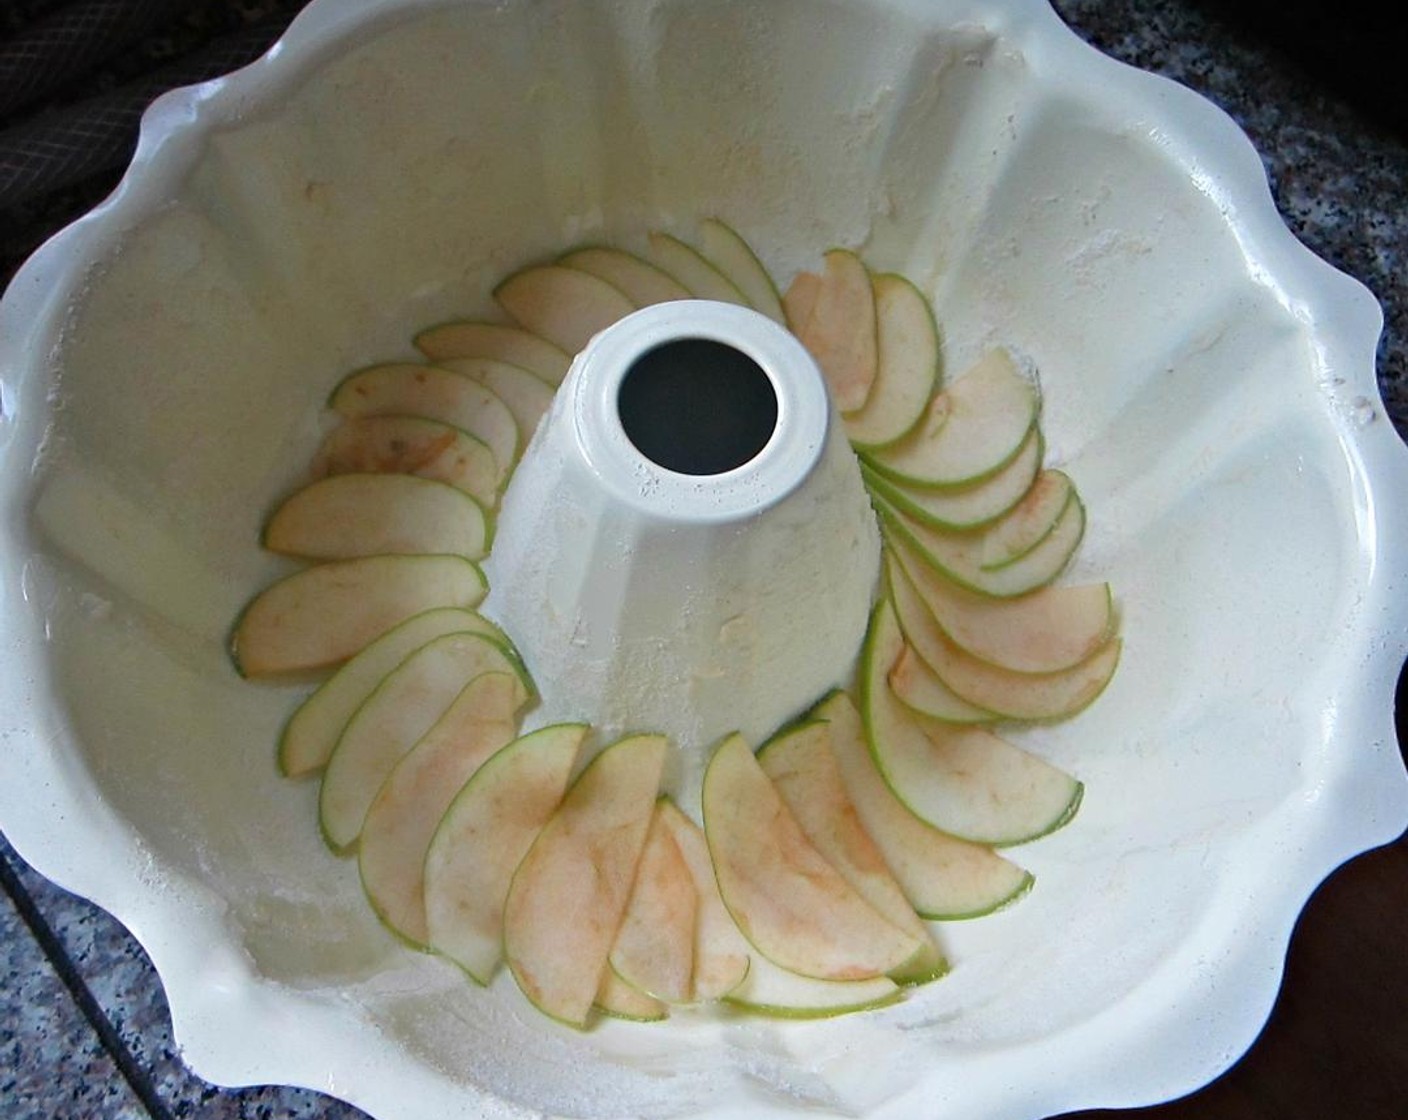 step 3 Take one quarter of a Granny Smith Apples (2) and run it through the mandoline or slice it very fine. Lay this quarter into the bottom of the prepared bundt pan in a fan to top your lovely cake.